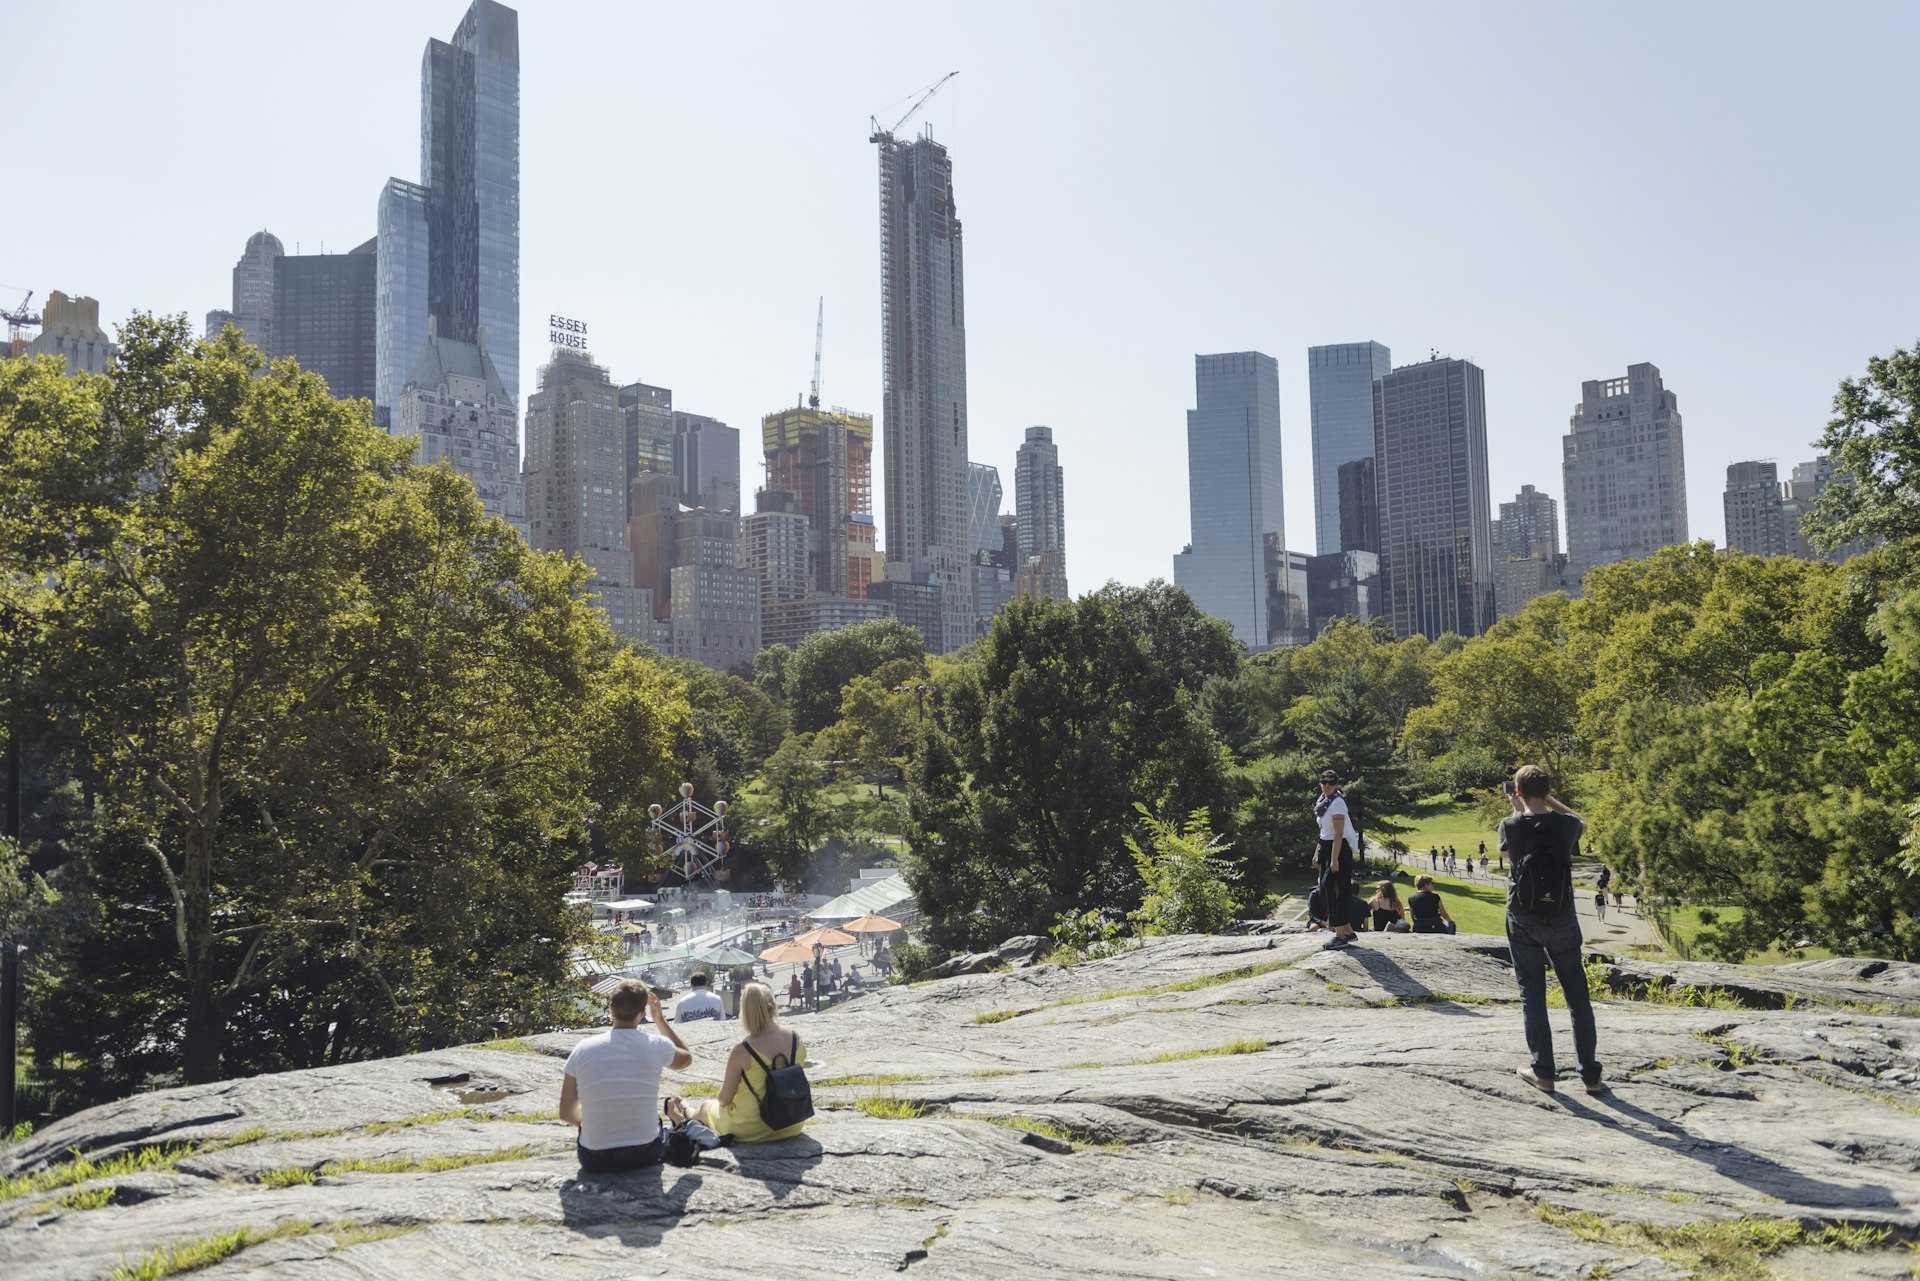 People relax on a rocky section of Central Park, with Victorian Gardens Amusement Park in the distance.